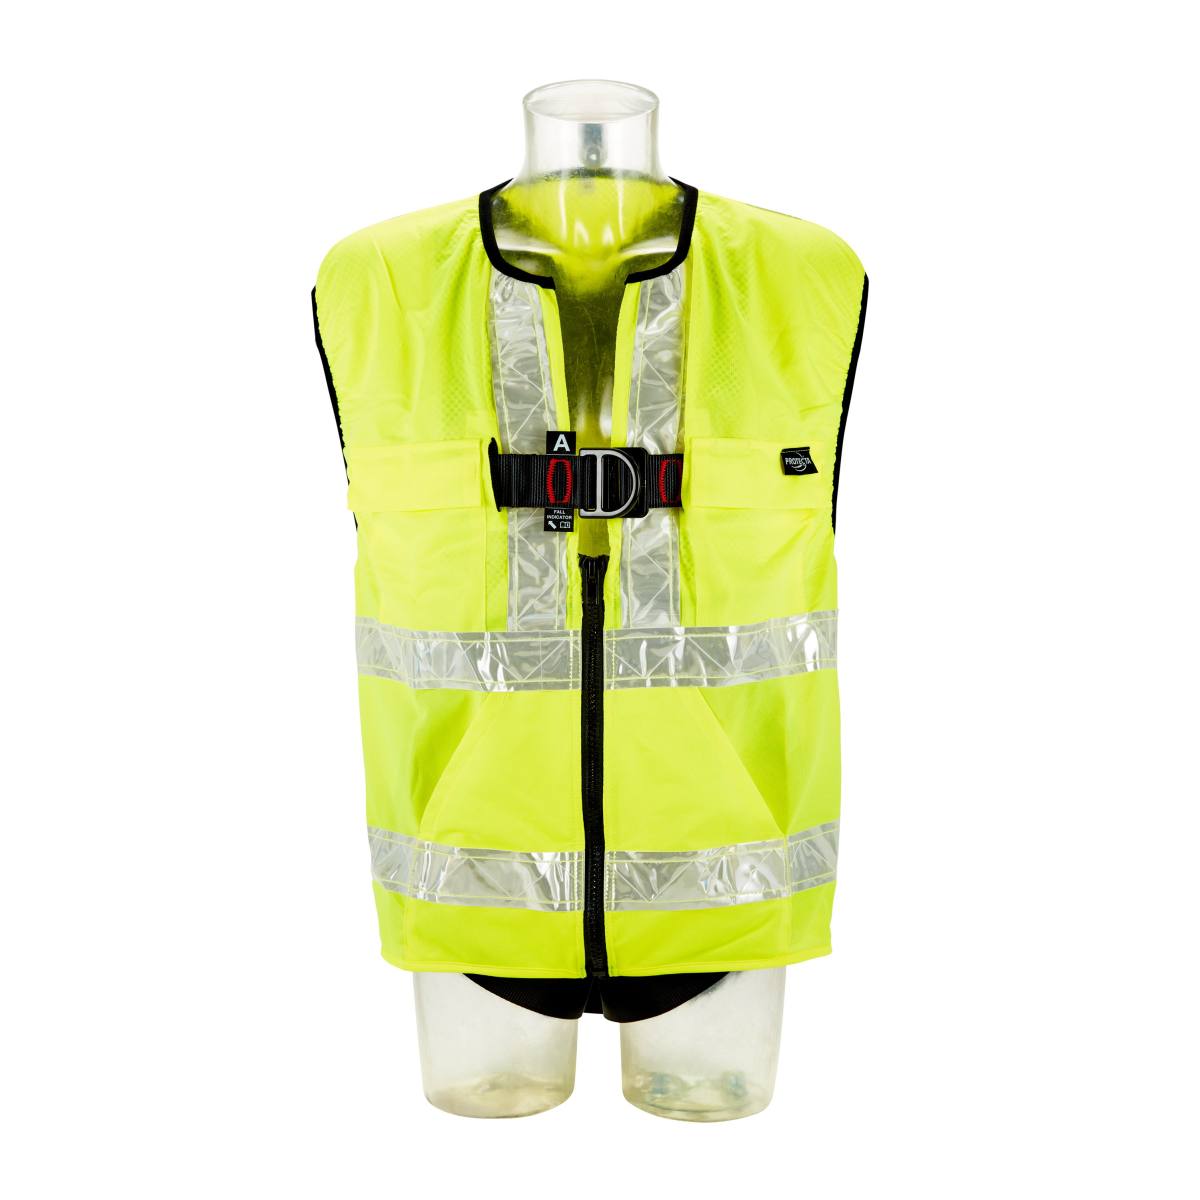 3M PROTECTA Safety harness - chest and rear fall arrest eyelets neon yellow high-visibility waistcoat Standard VS chest and rear fall indicators Belt end depot Label protection with labelling field black coated fittings Lanyard holder M/L